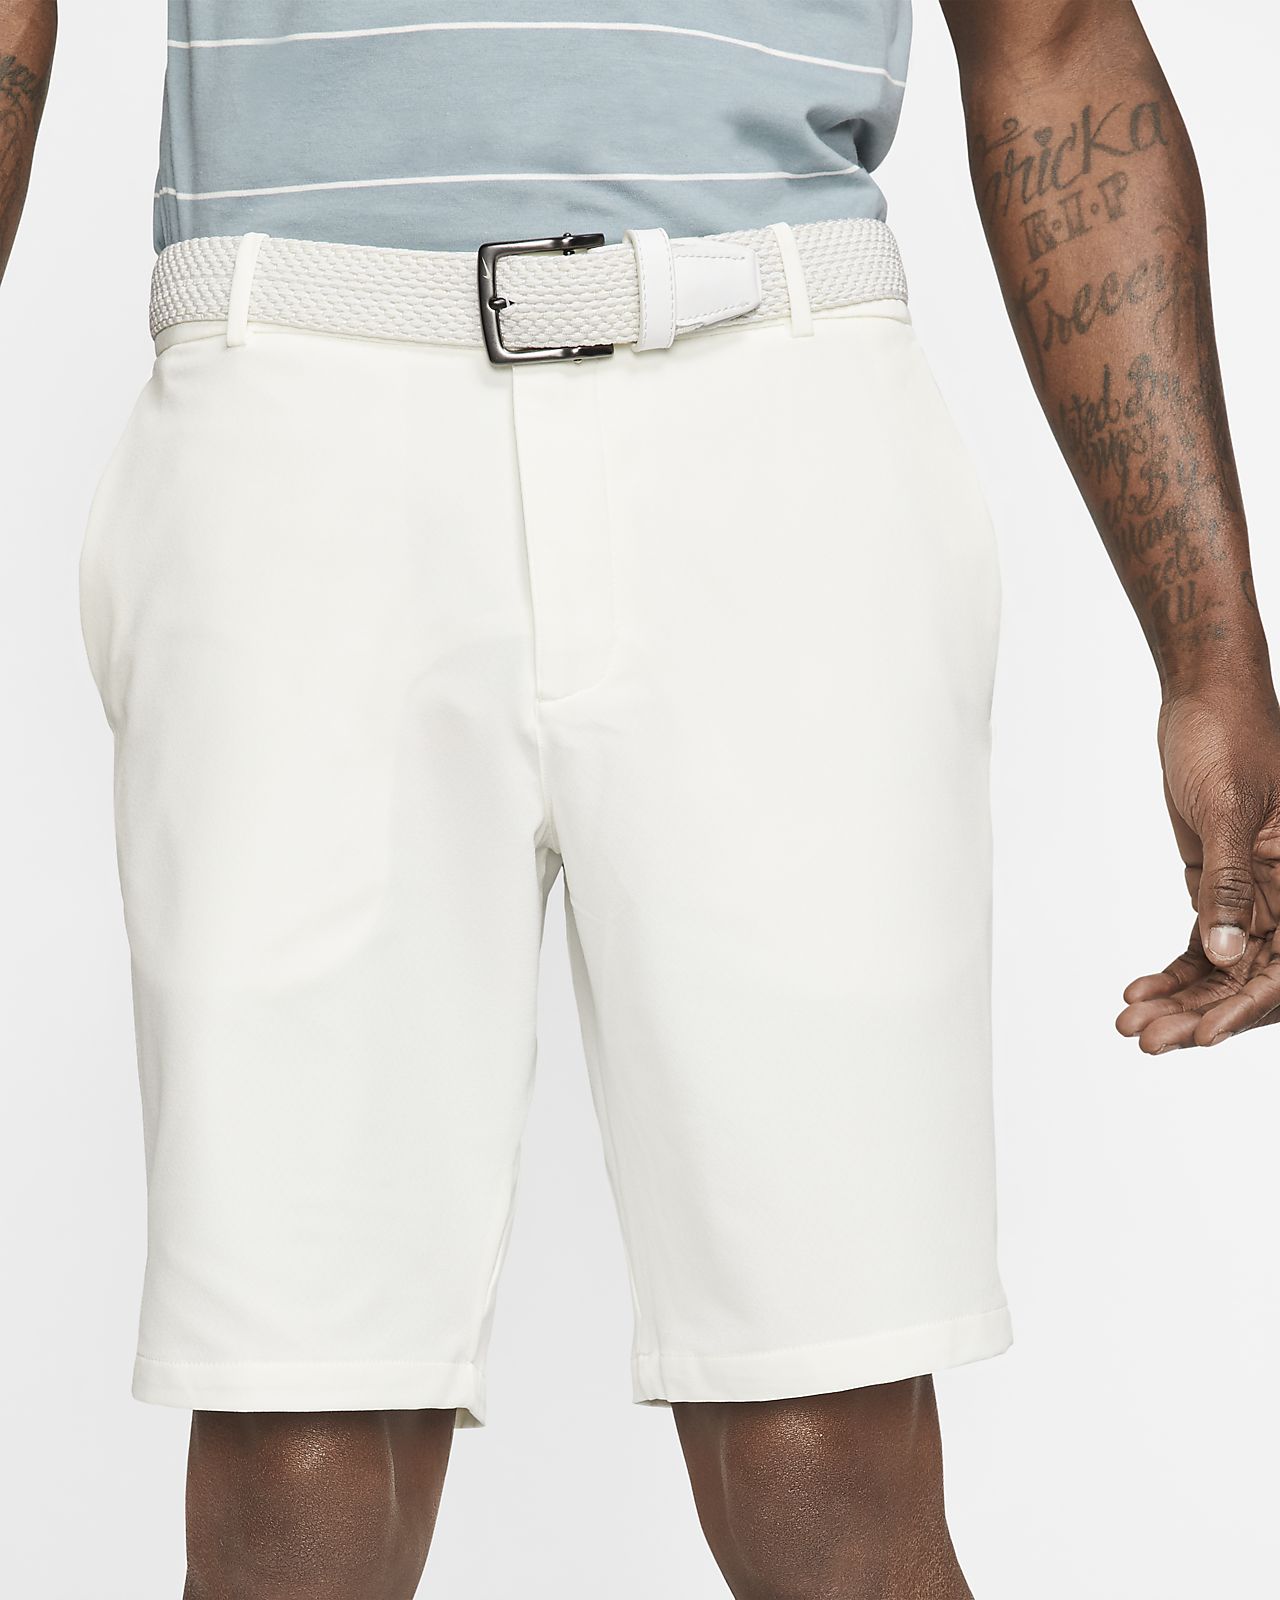 nike golf shorts big and tall cheap online